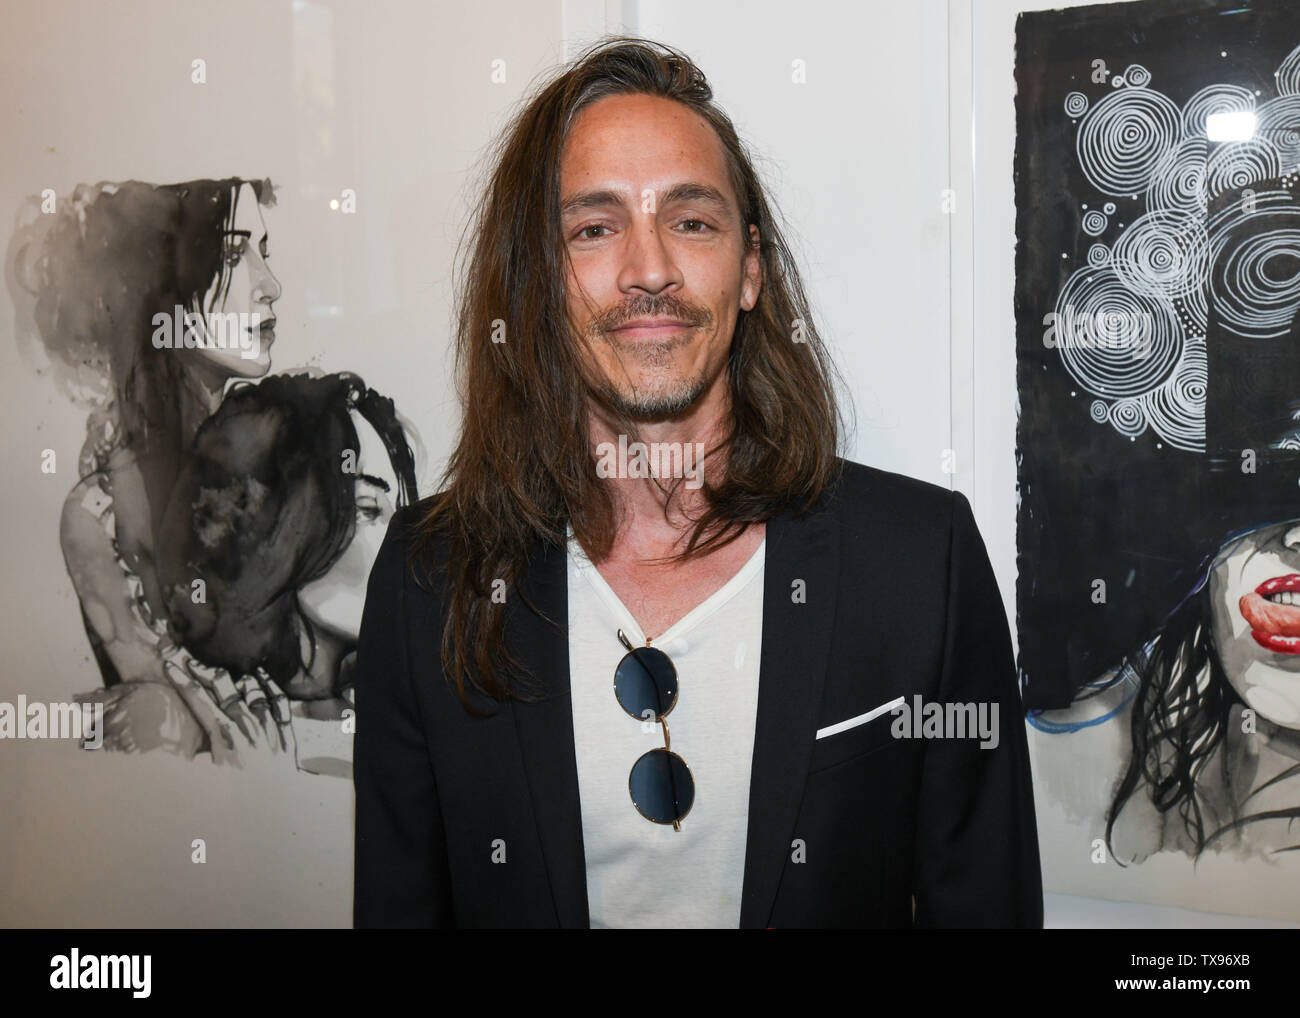 June 23, 2019 - Brandon Boyd with his art work at the 'Love and Art' group show at the Lumber Yard Gallery in Malibu, California. (Credit Image: © Billy Bennight/ZUMA Wire) Stock Photo